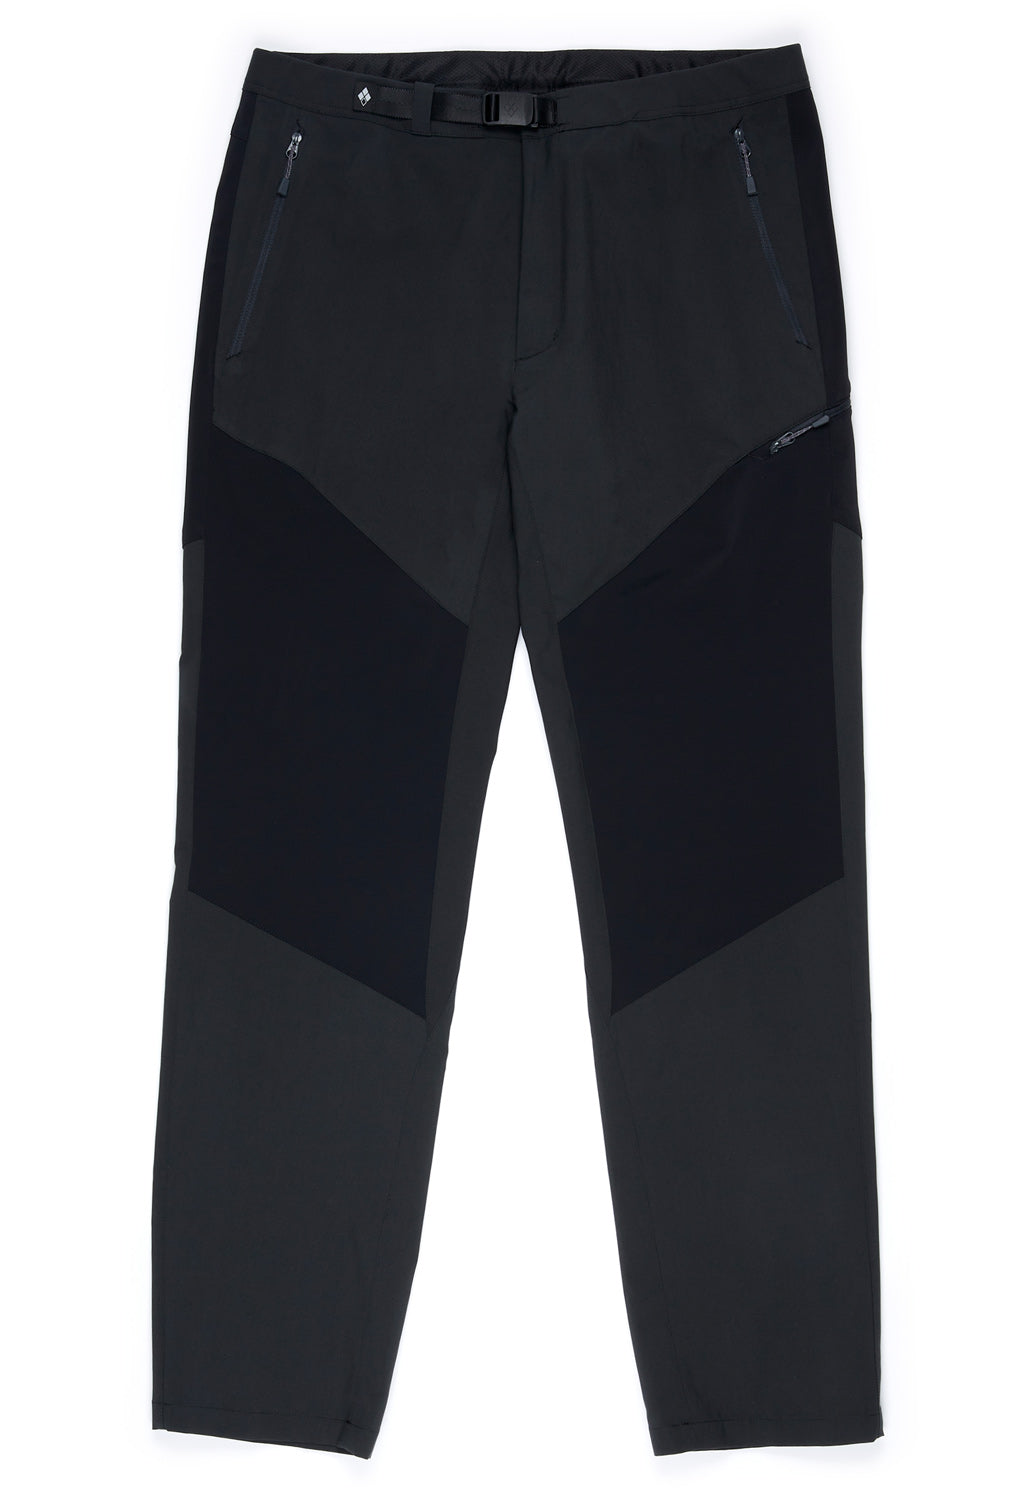 Montbell Men's Guide Pants 0